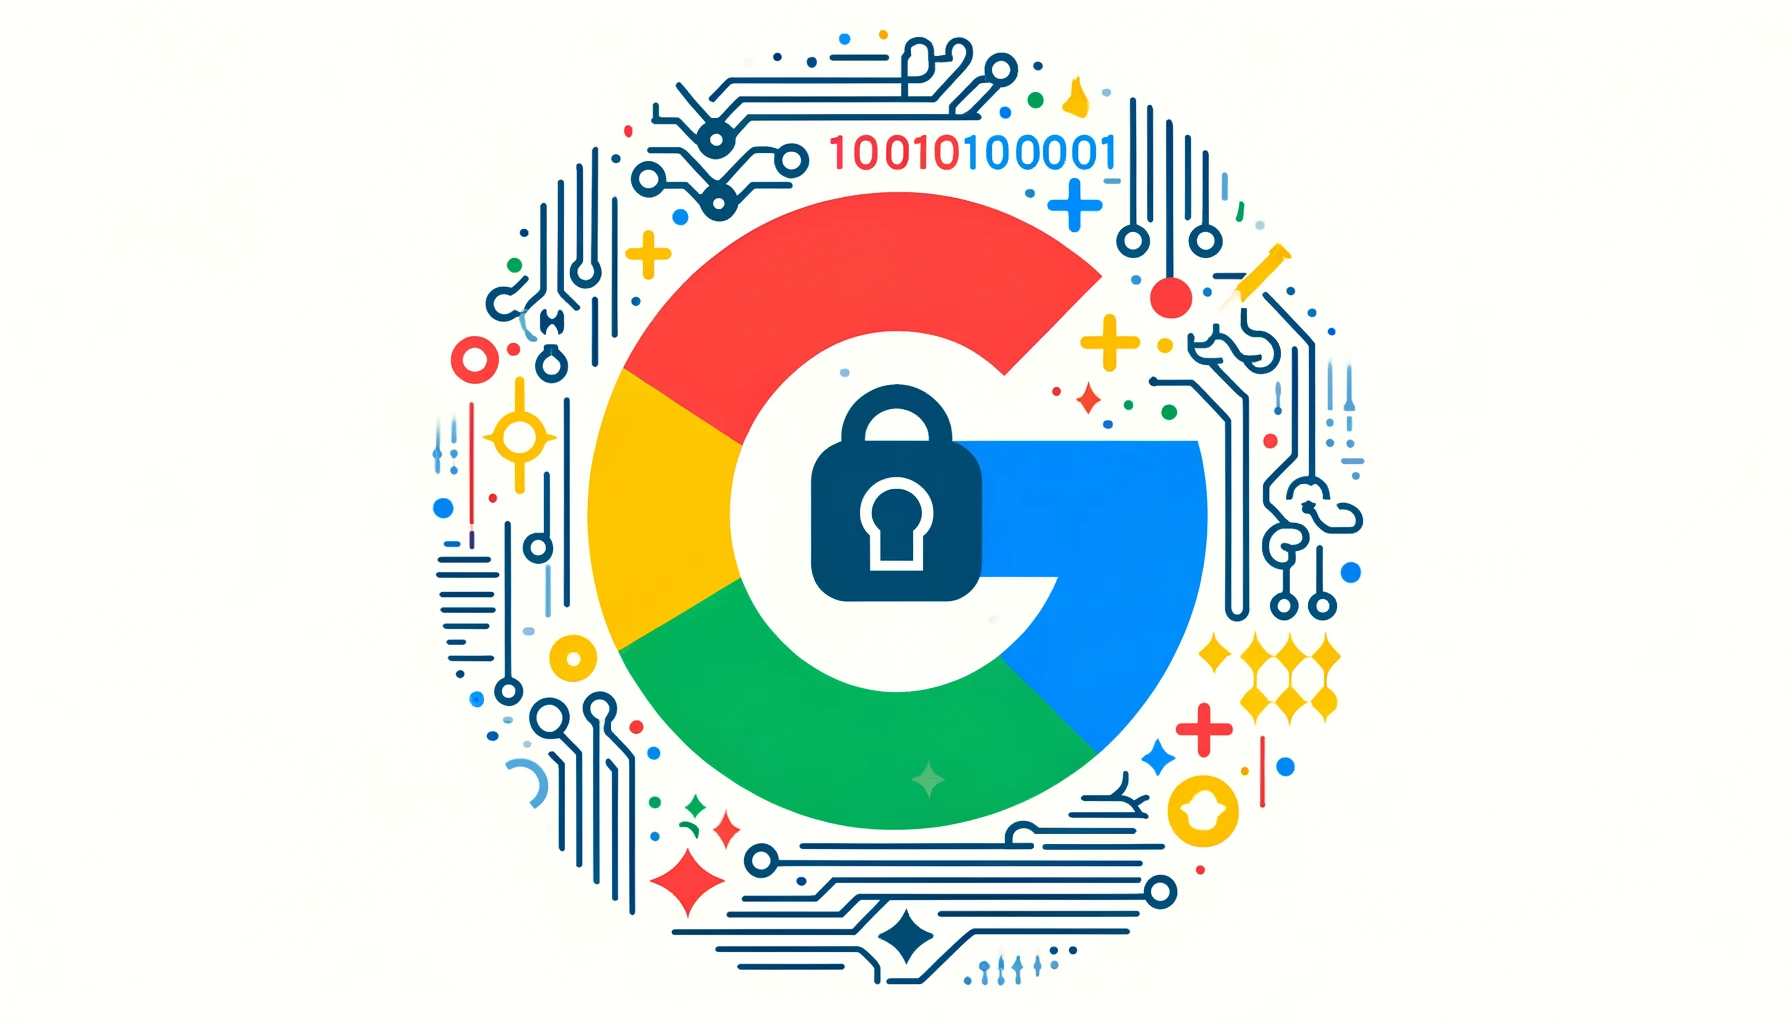 Google pivots its AI strategy towards bolstering cybersecurity.